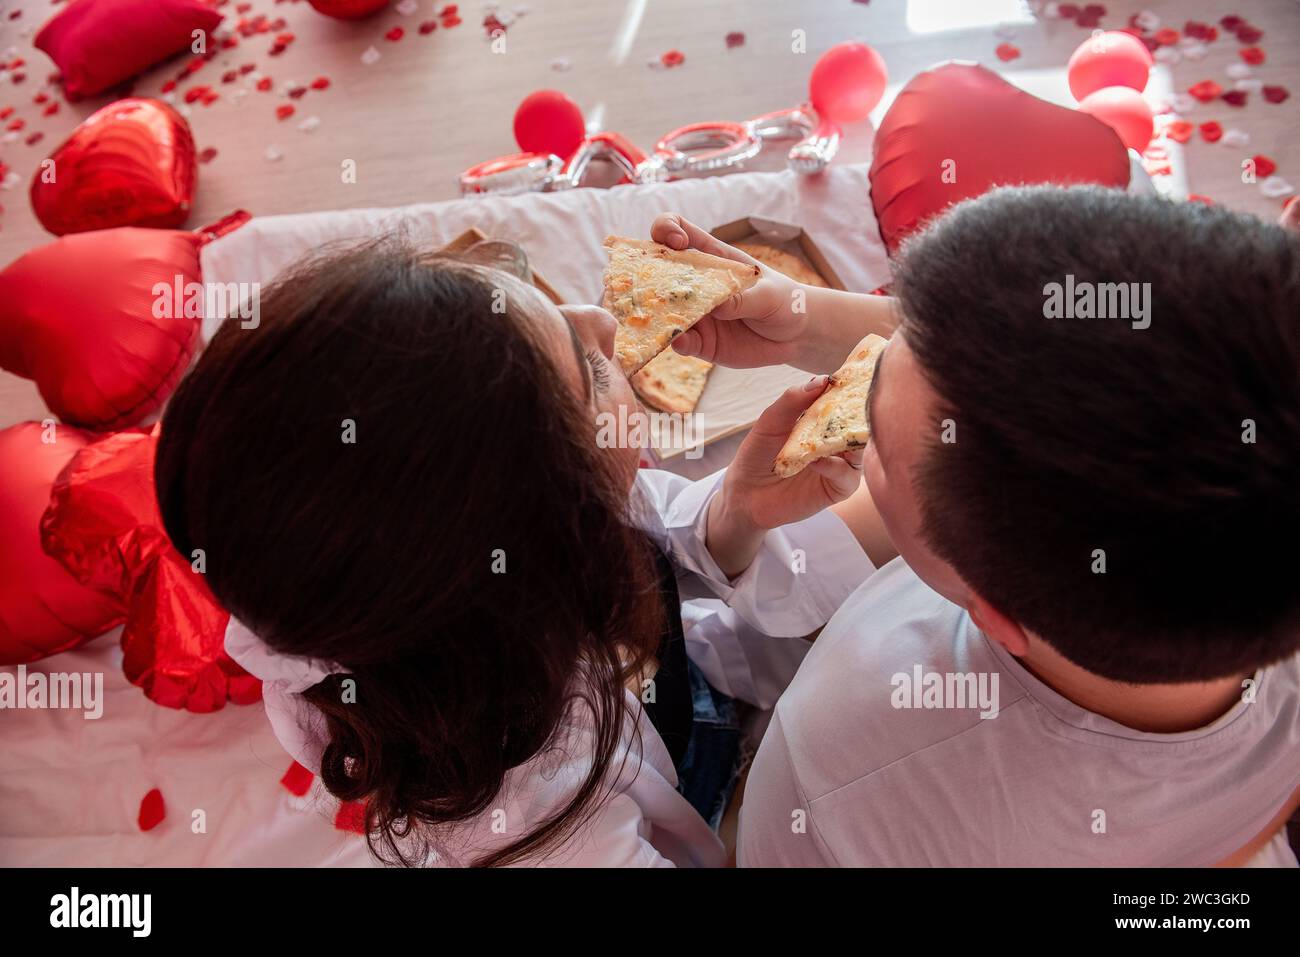 Top view of young couple feeding each other, enjoying pizza from takeaway box, with glasses of champagne, green grapes. Man and woman sharing festive, Stock Photo